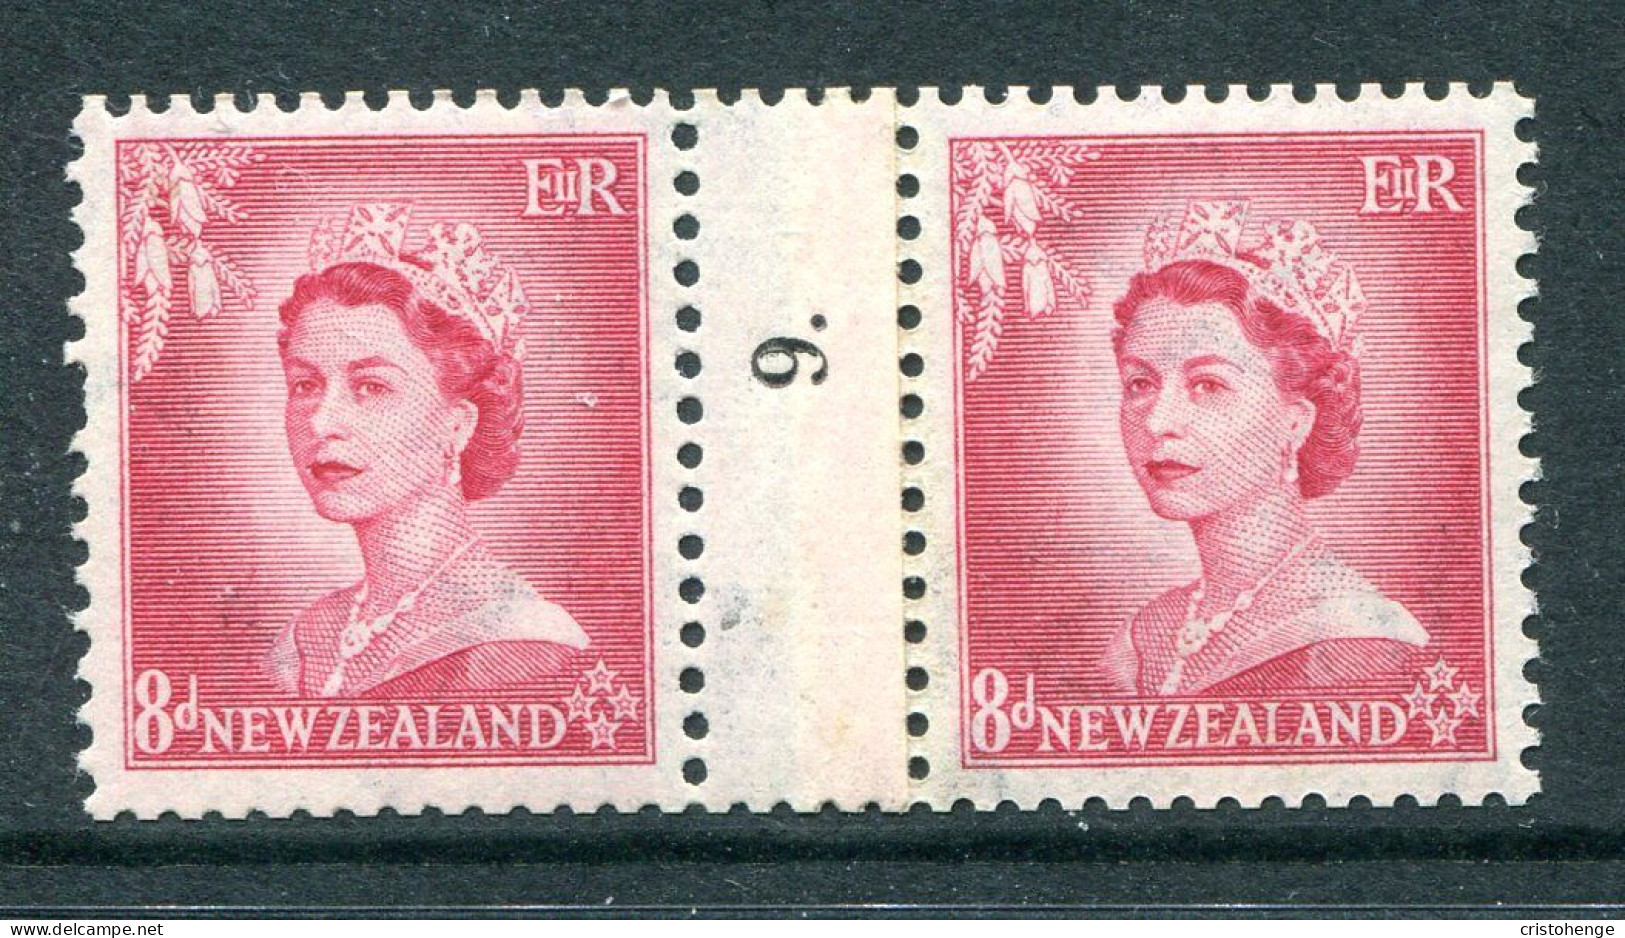 New Zealand 1953-59 QEII Definitives - Coil Pairs - 8d Rose-carmine - No. 9 - LHM (SG Unlisted) - Neufs